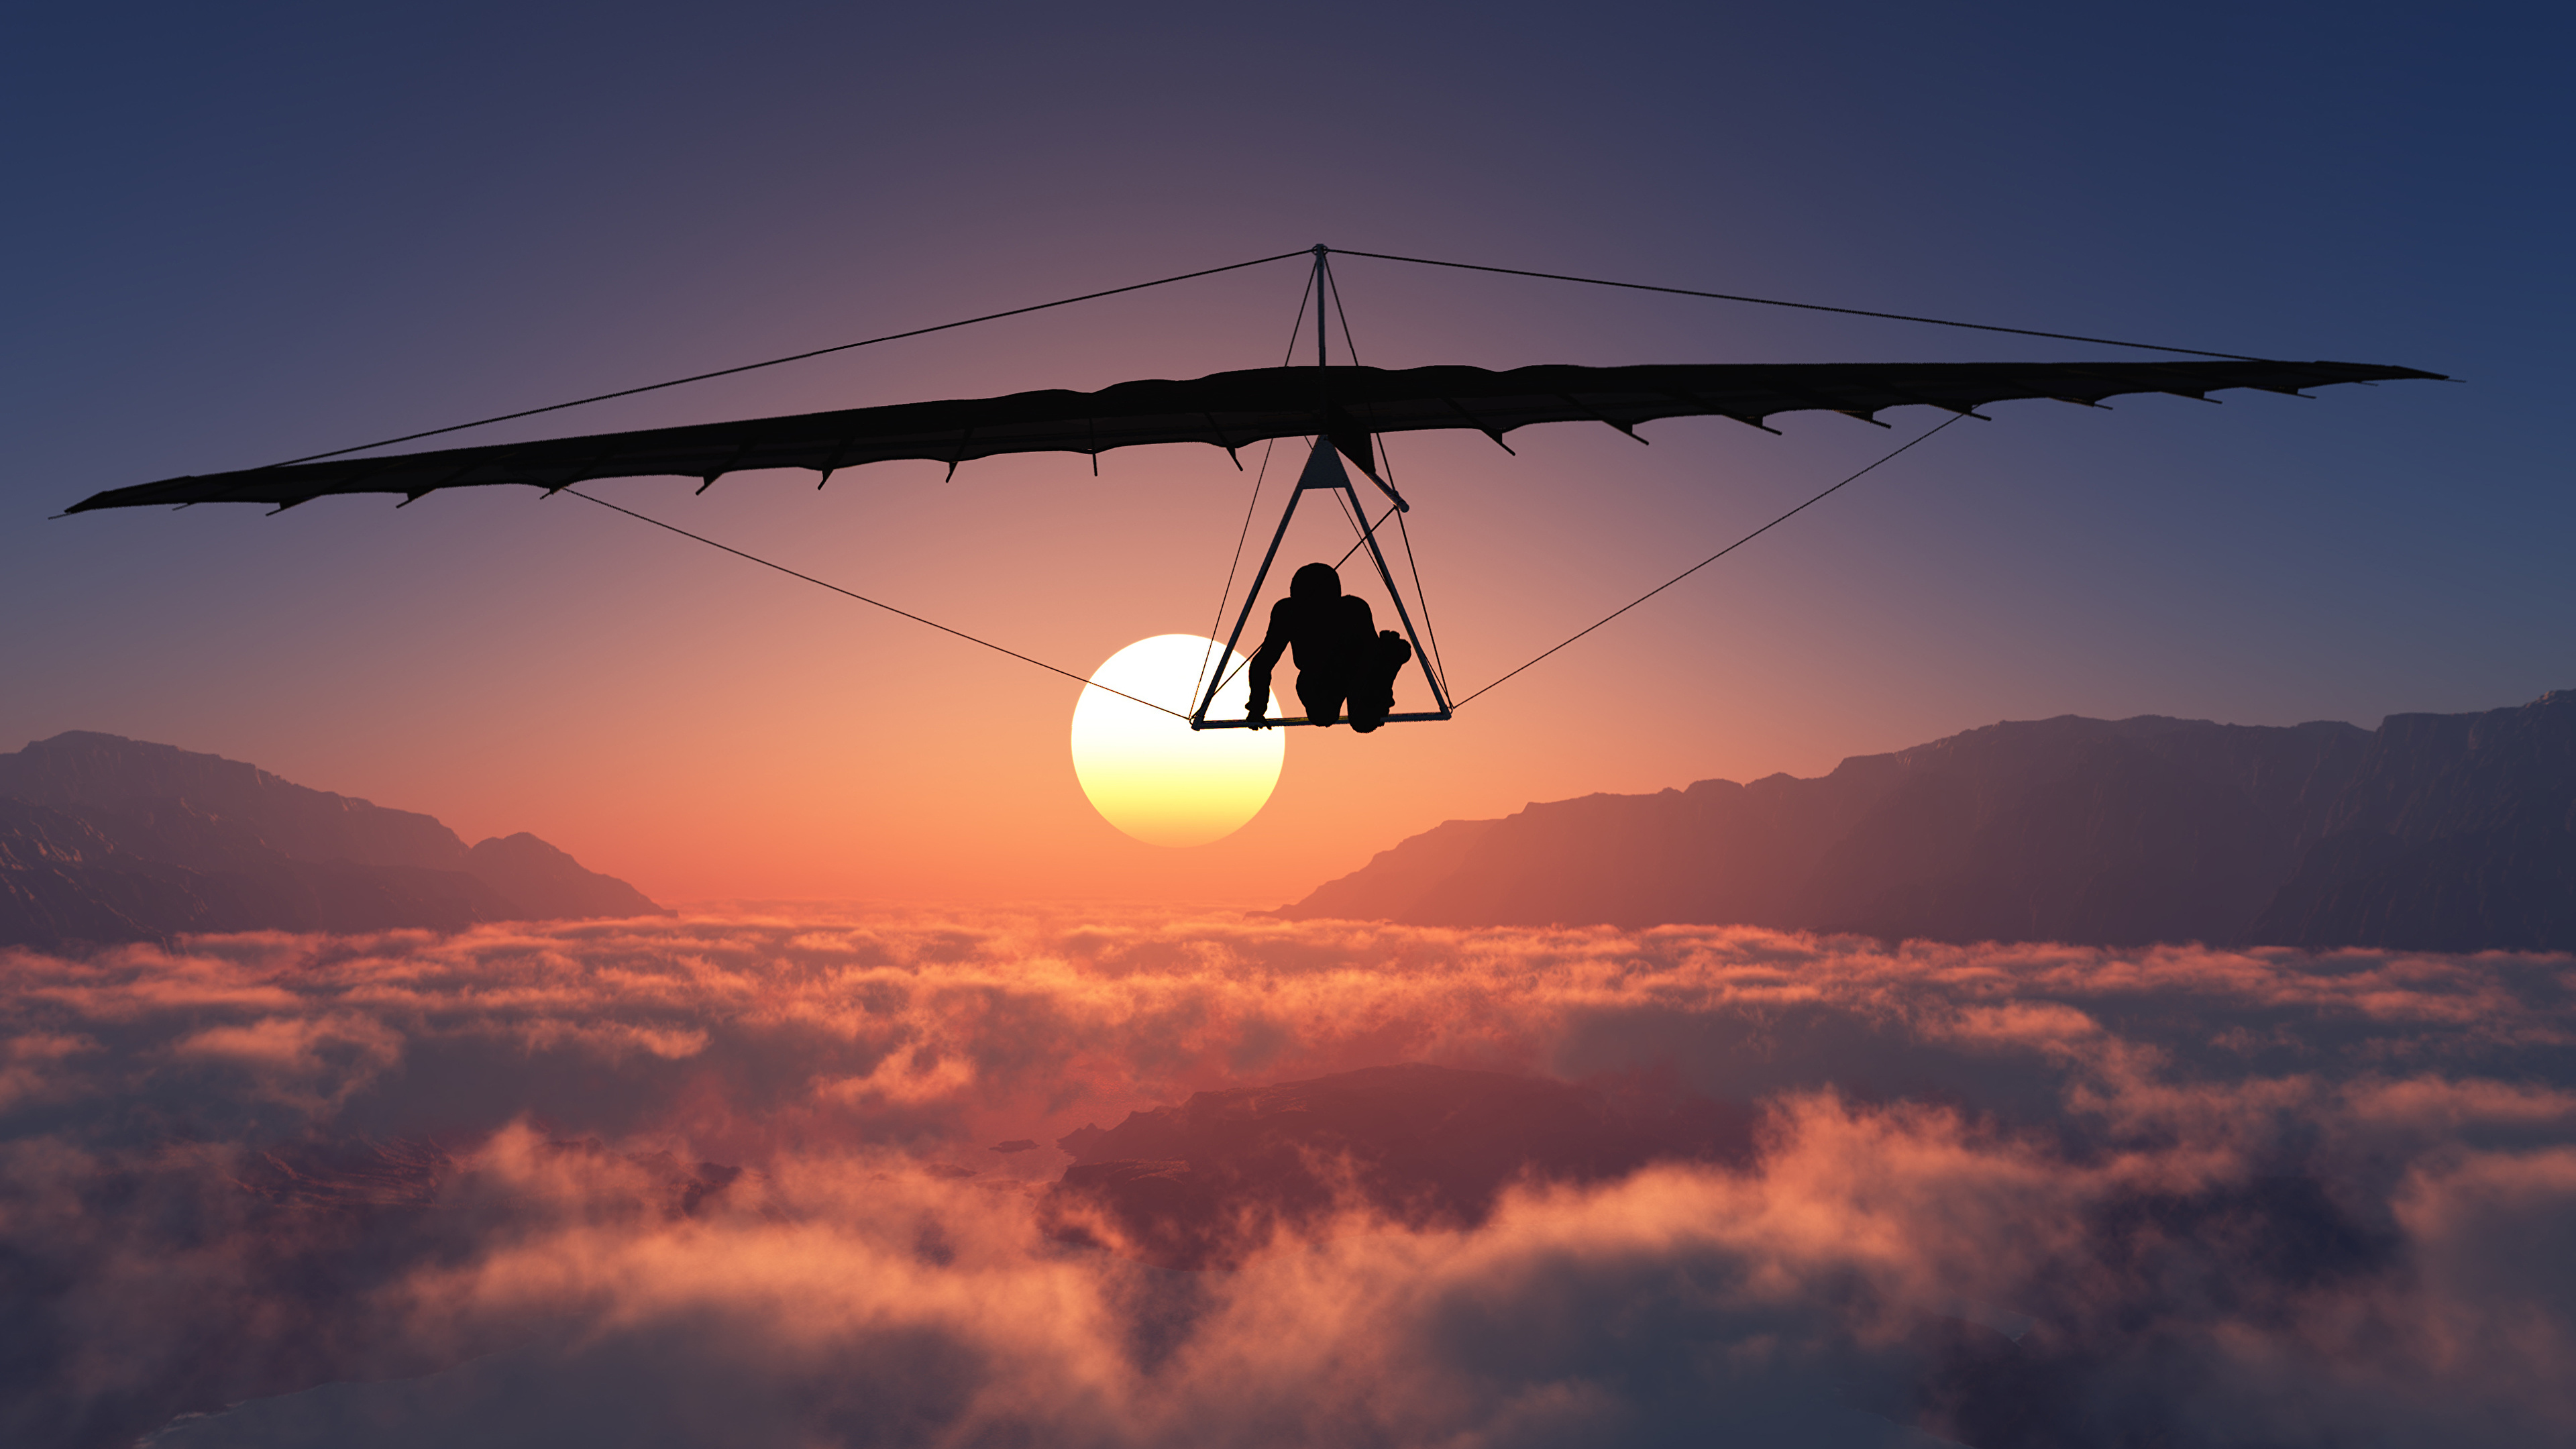 Hang Gliding Wallpaper and Background Image